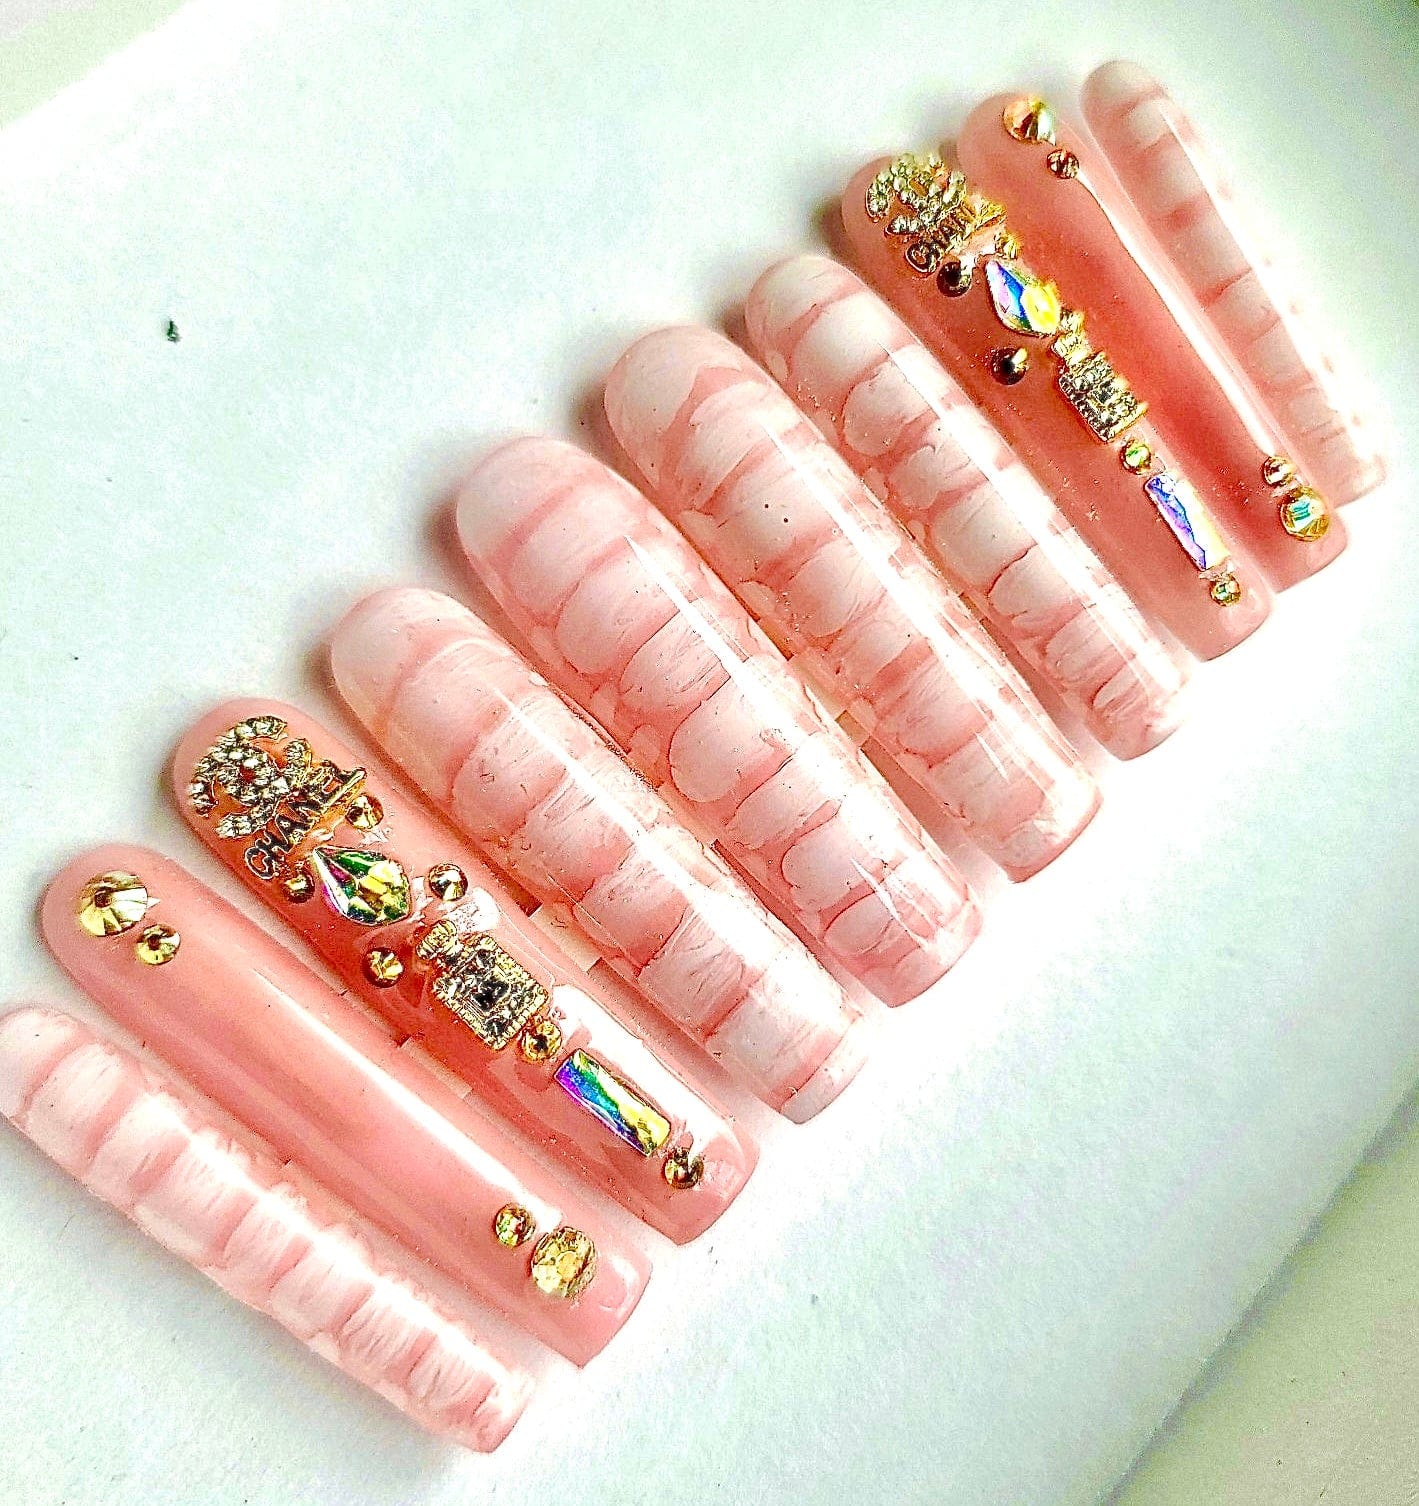 NailedByNiki2swt Date Night Press on Nails Self Care Accessories